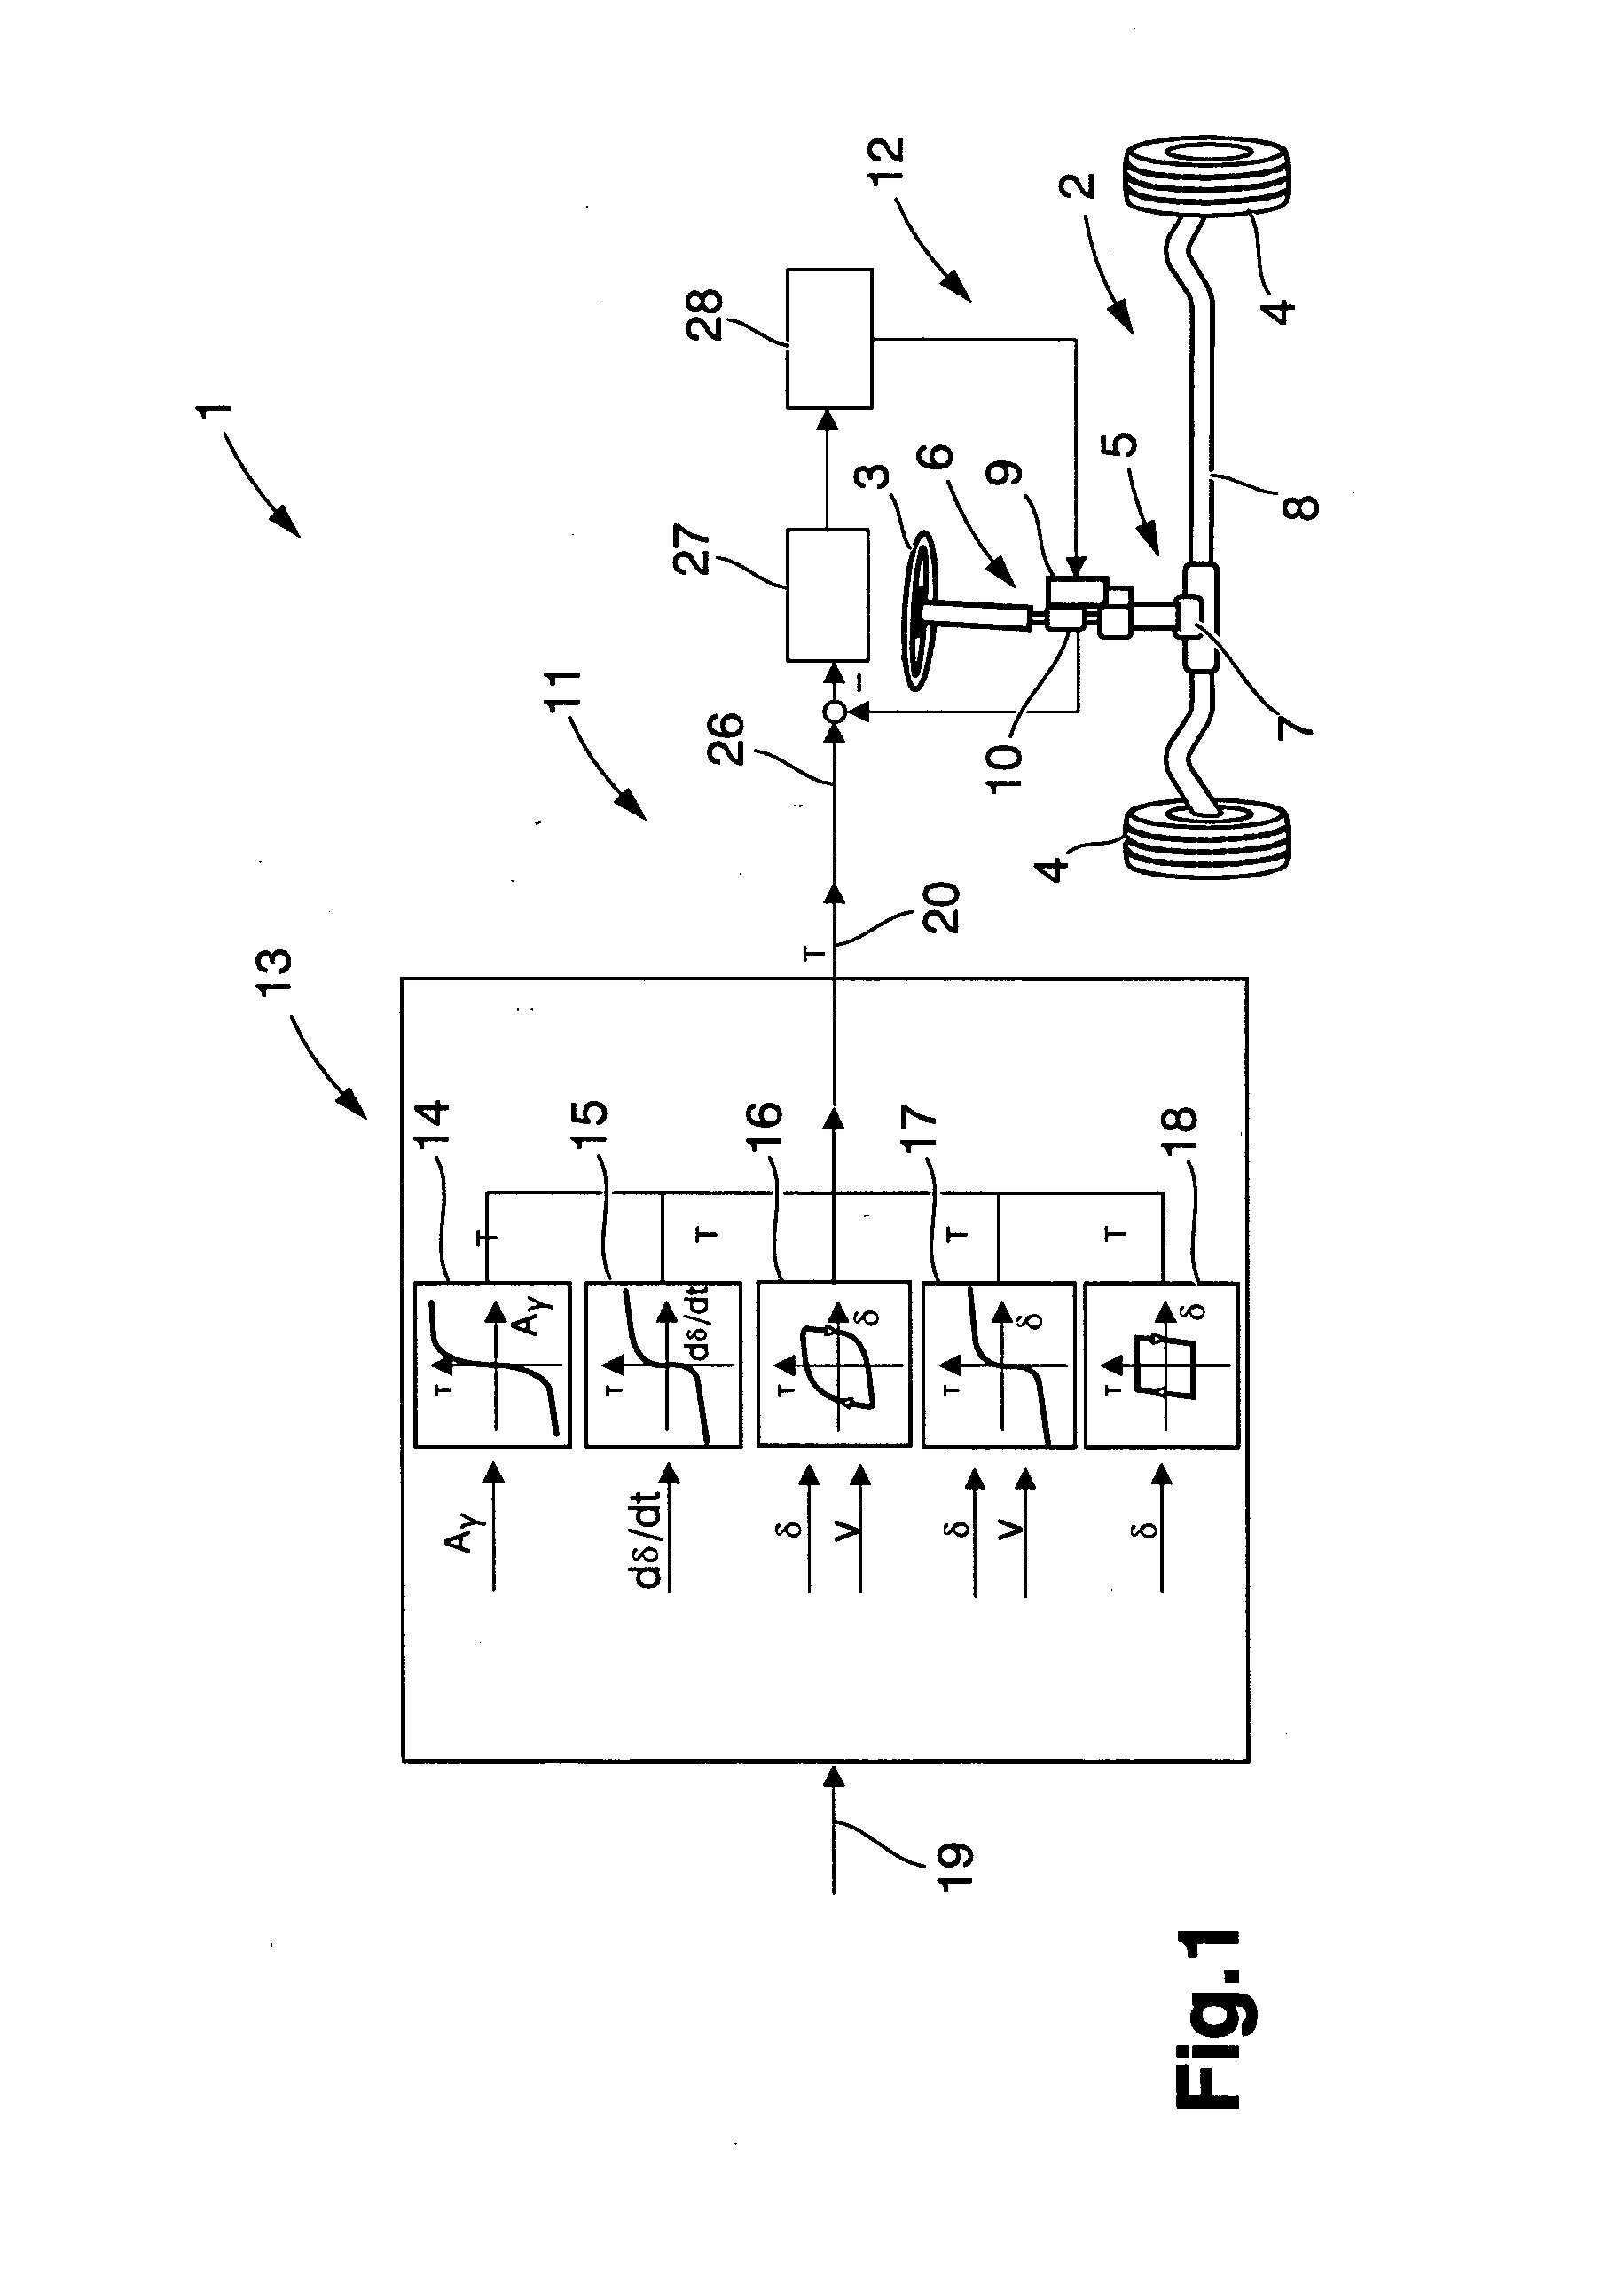 Method and a system for assisting a driver of a vehicle during operation